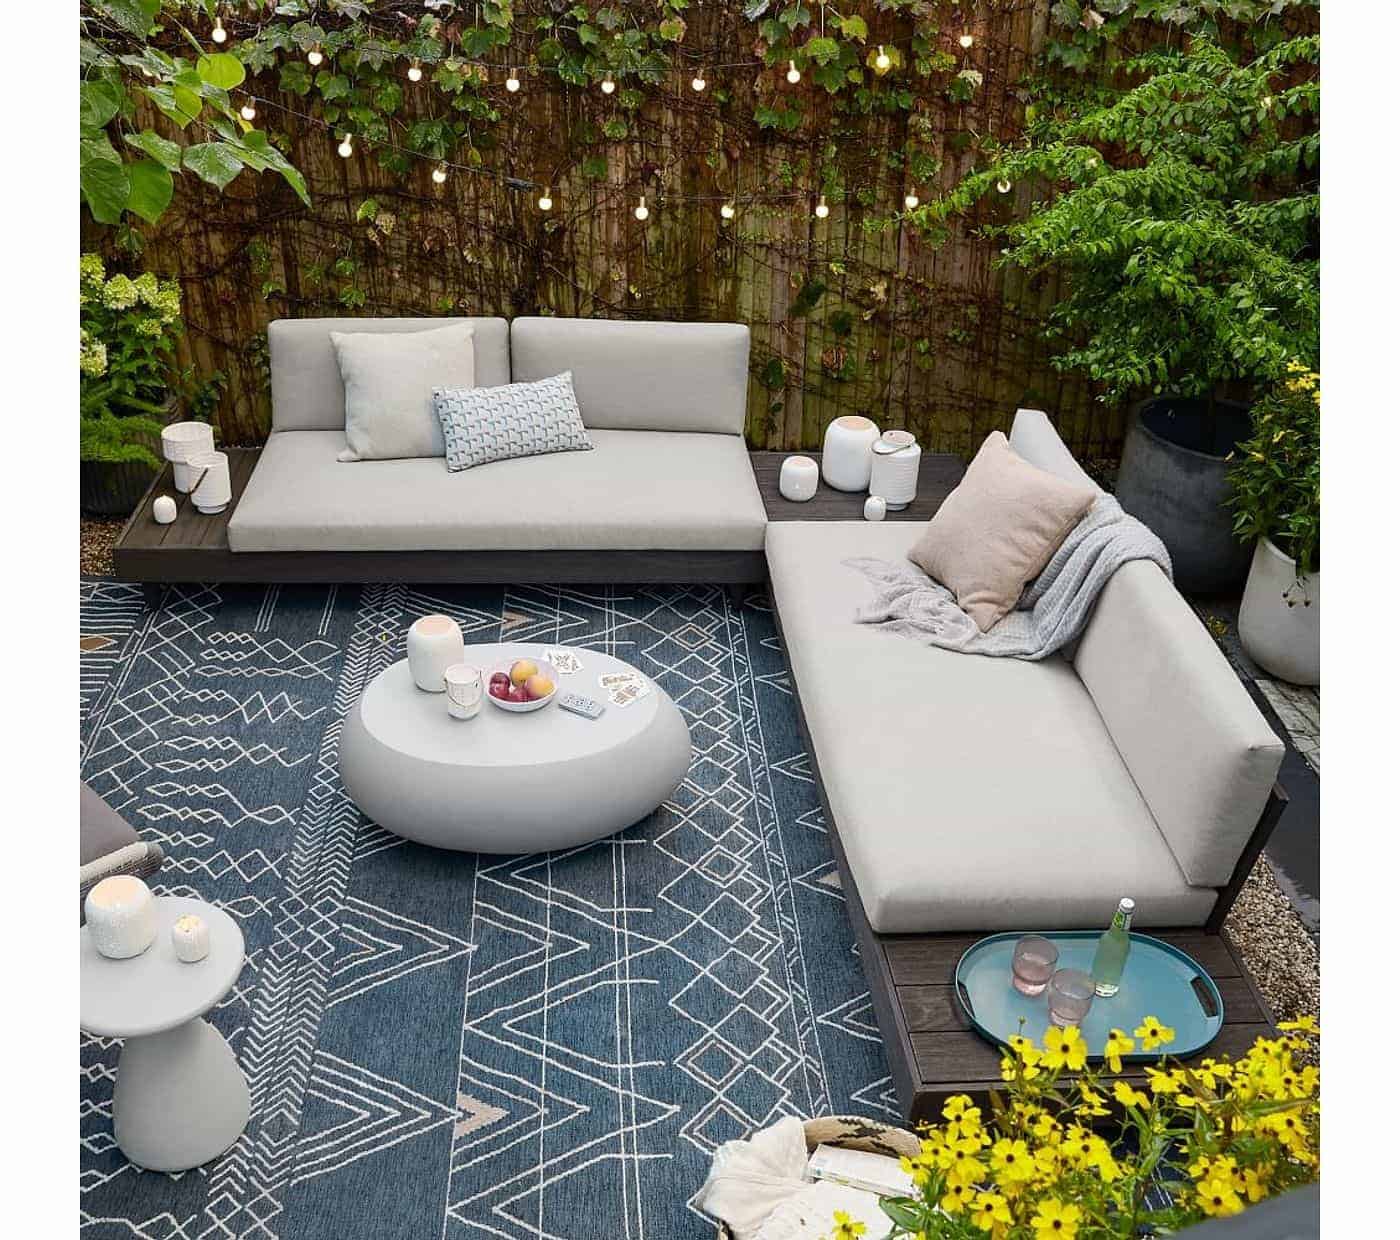 blue rug placed outdoors with white sofa